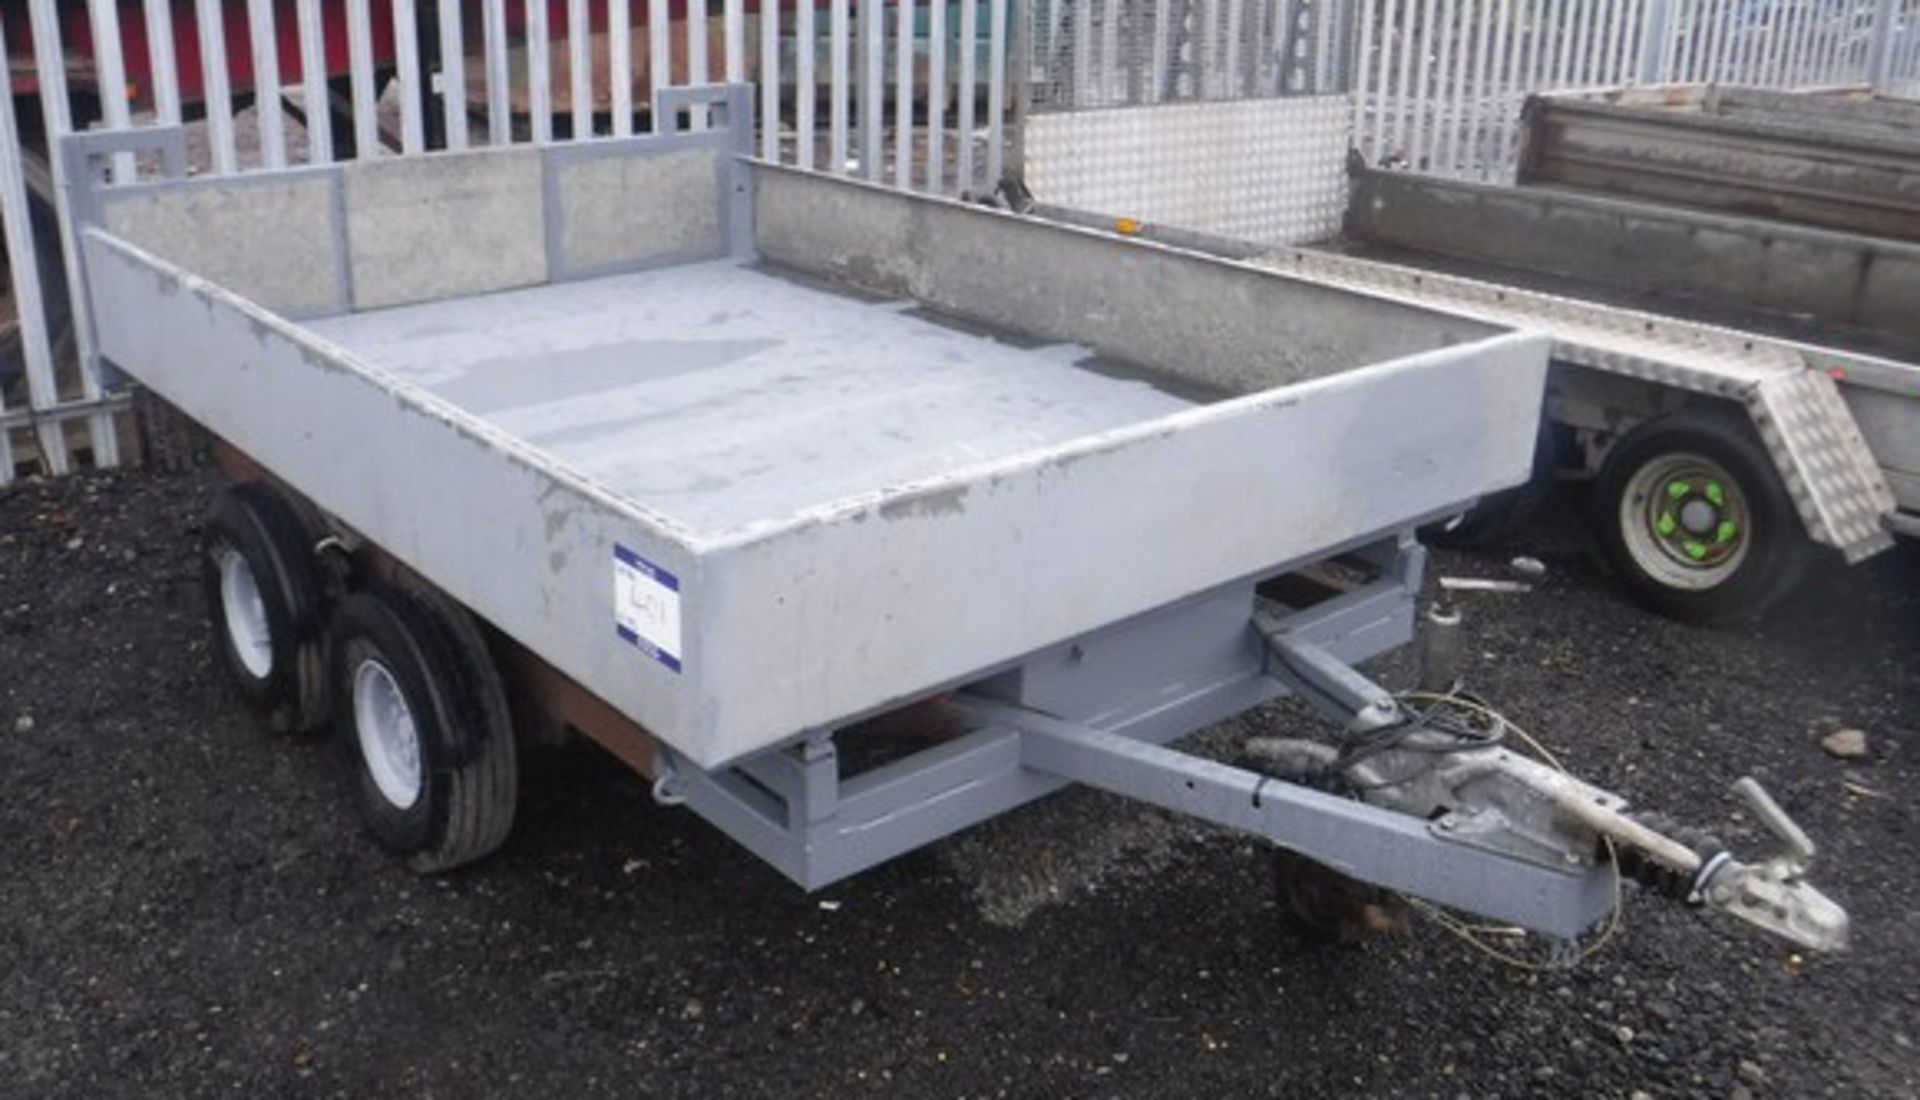 TIPPING TRAILER, 2 ton, fixed galvanised sides. 2.6m x 1.85m. No plates or paperwork